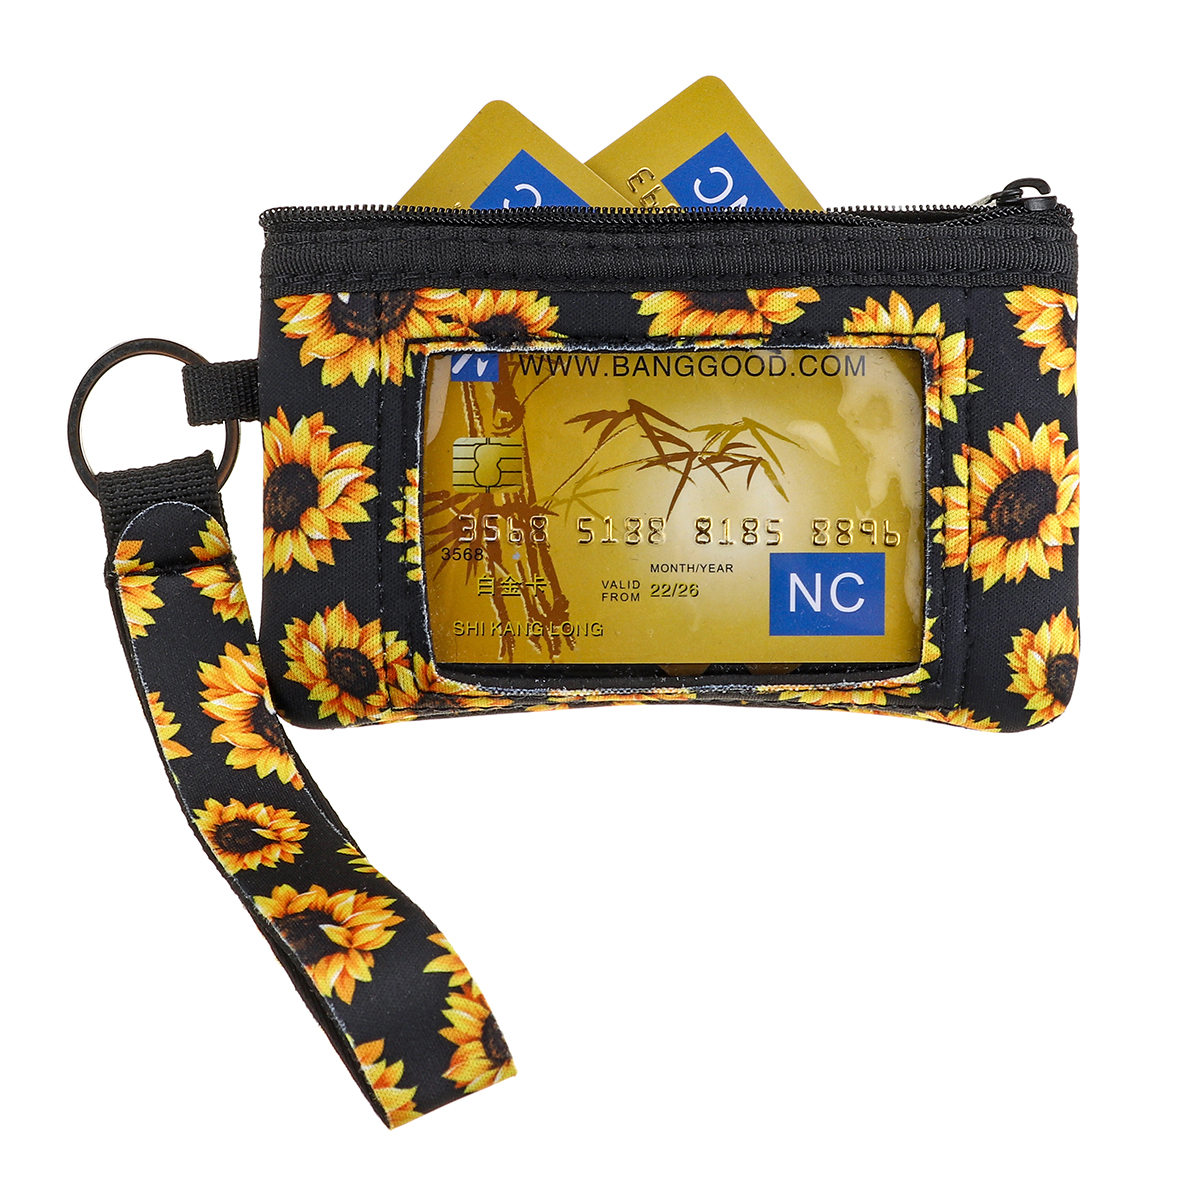 Sunflower-Pattern-Fashion-with-Zipper-PVC-Window-Female-Coin-Pouch-Small-Change-Bags-Purse-1806355-4